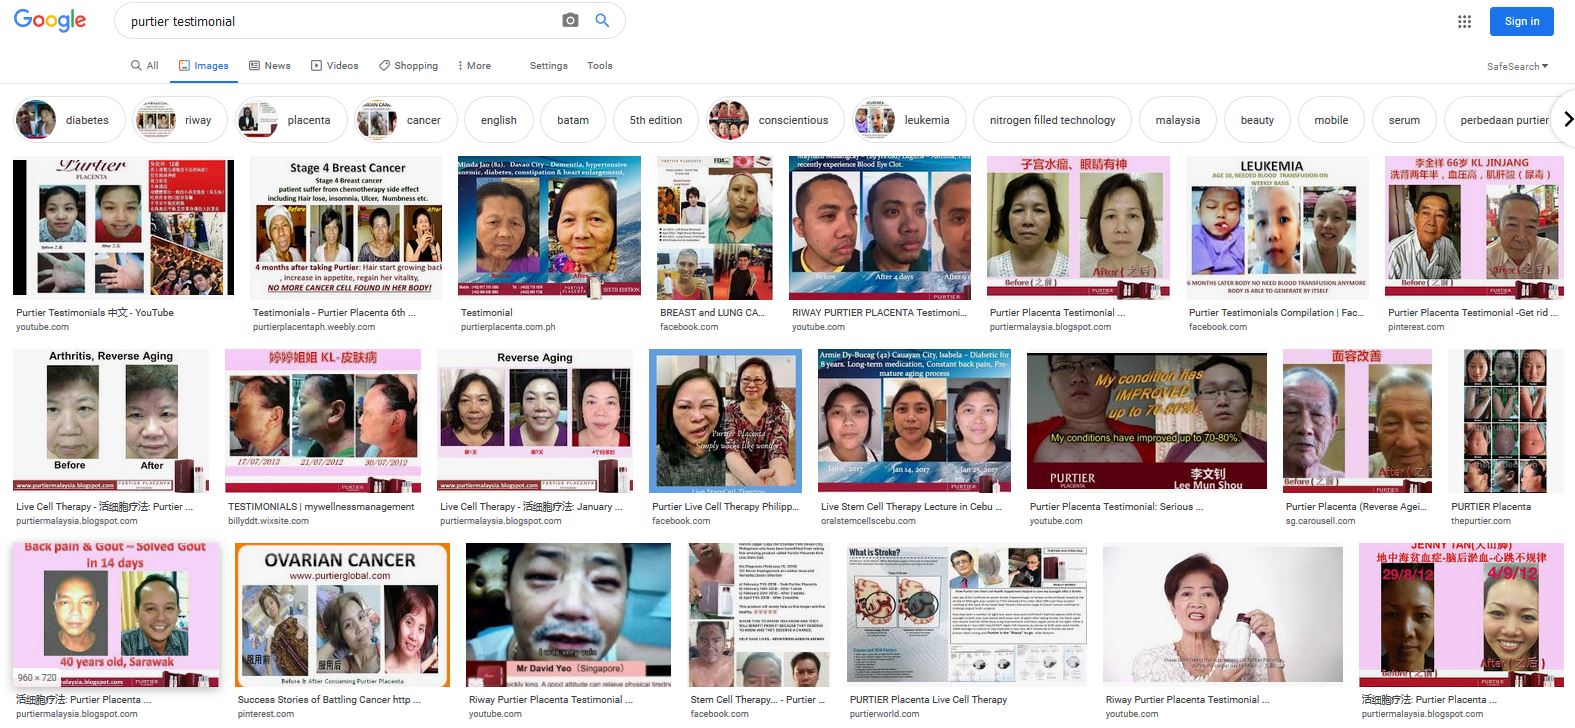 Google images search PURTIER testimonials